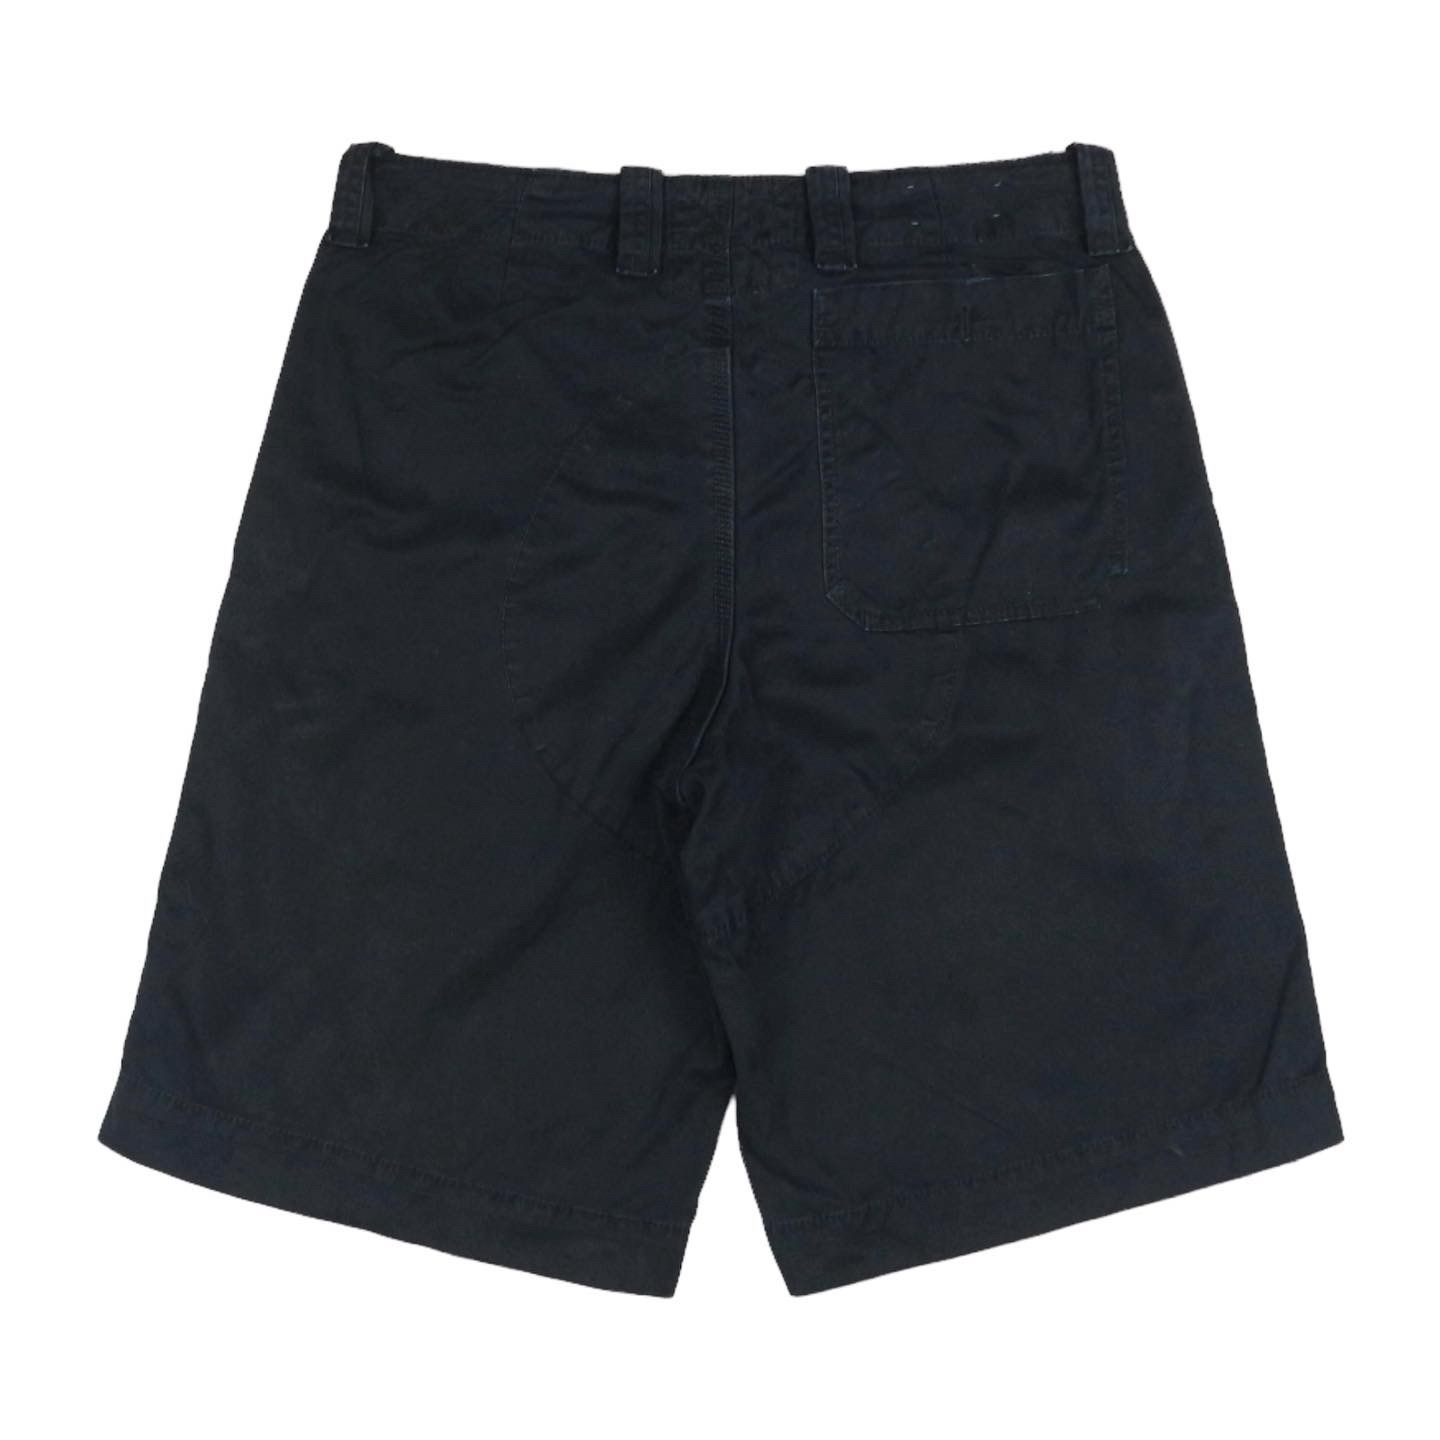 Polo by Ralph Lauren Shorts Size 30